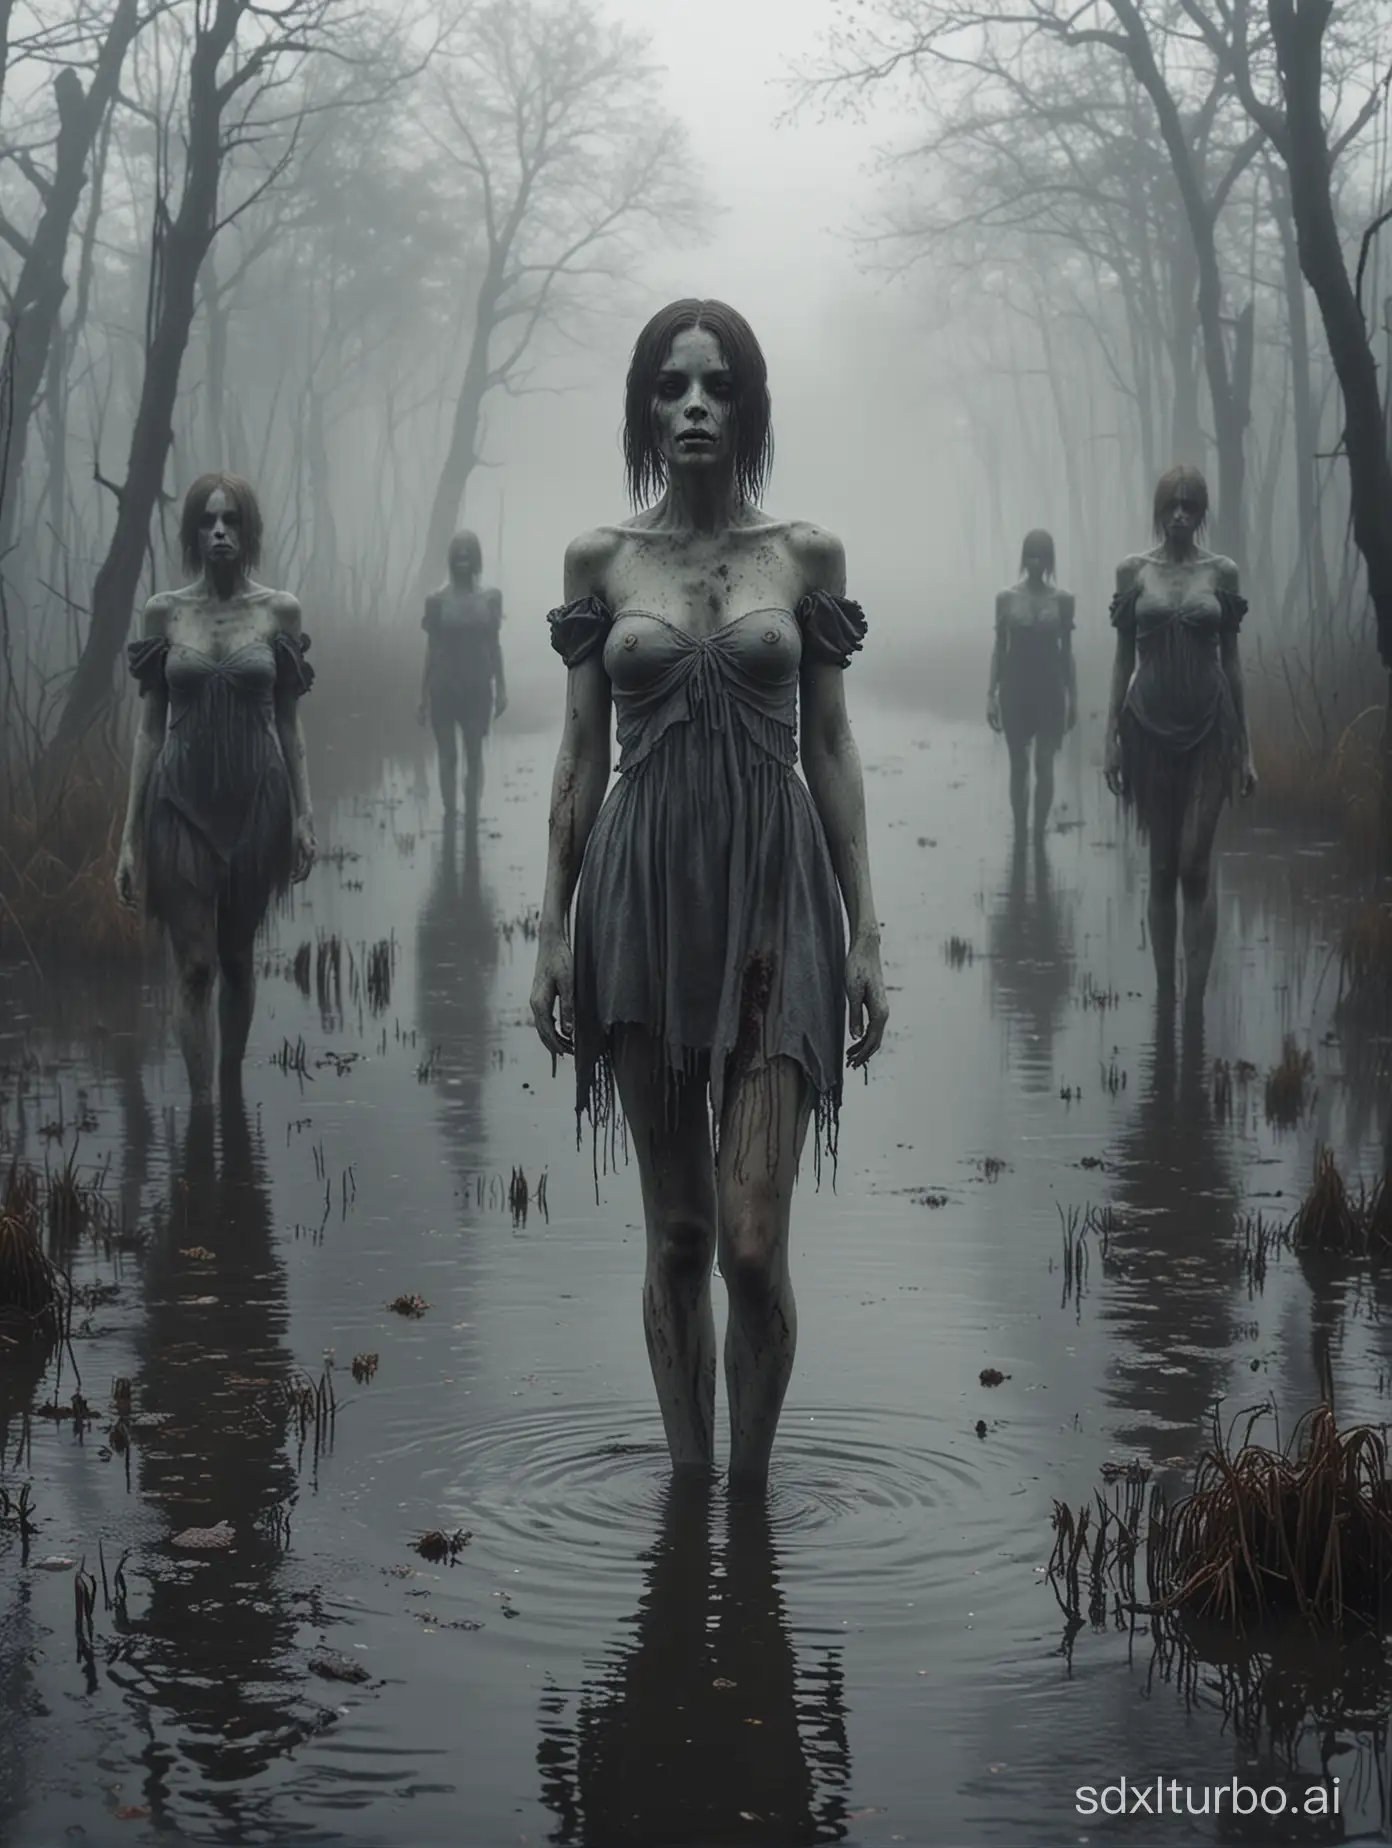 Format photo 5:4
Camera lens 120 mm
prospect framing, horror atmosphere, 
Faceless zombie girls, levitate, dead body, gothic style, 30 years old, no eyes, no mouth, no nose, full body photo, in a foggy swamp, photorealistic, 4k, hi resolution, 
